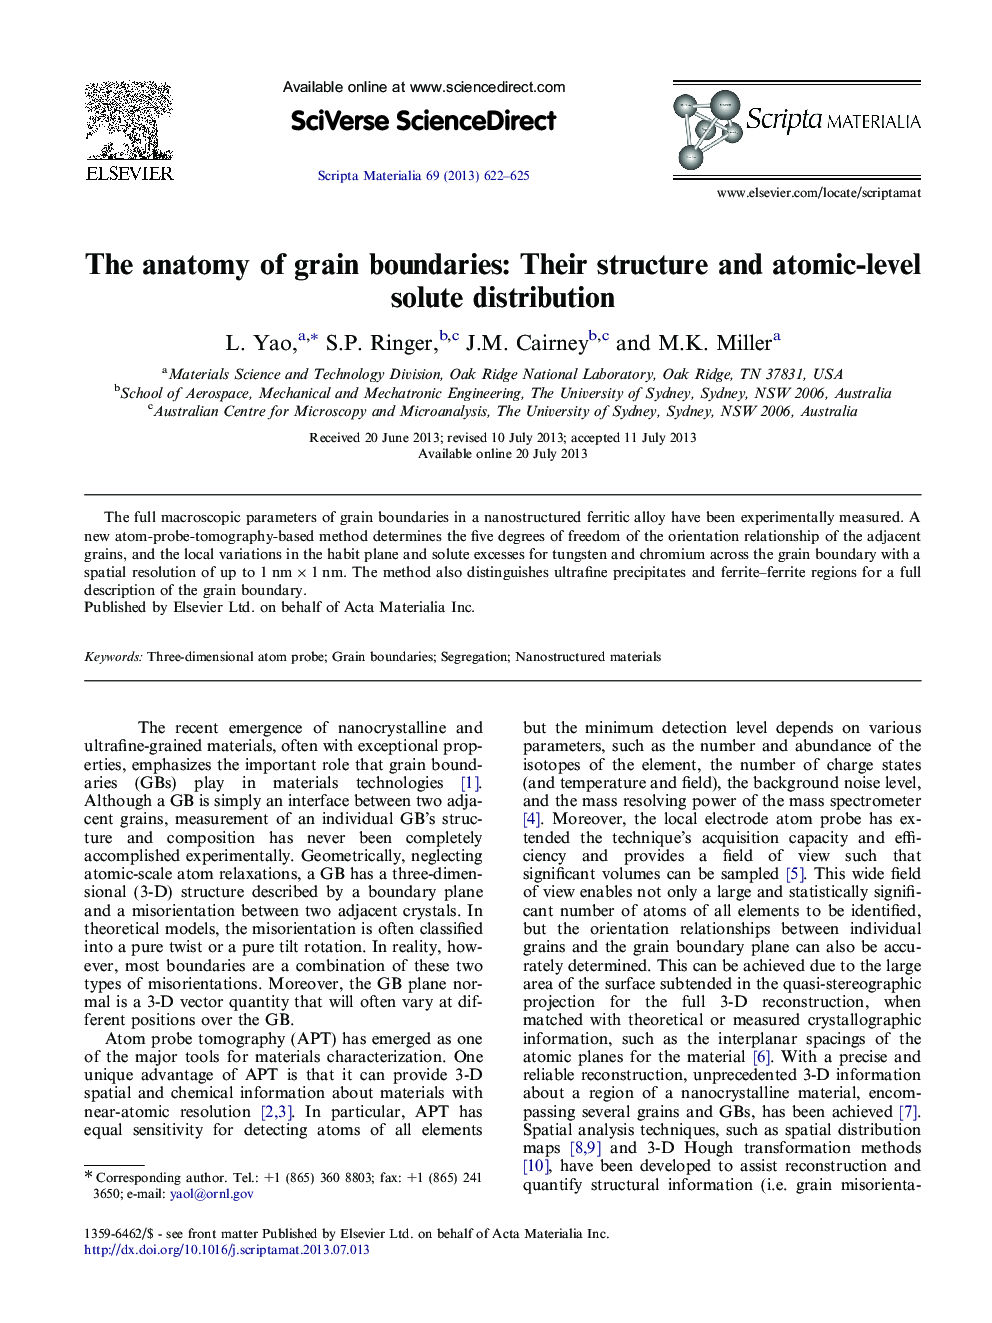 The anatomy of grain boundaries: Their structure and atomic-level solute distribution